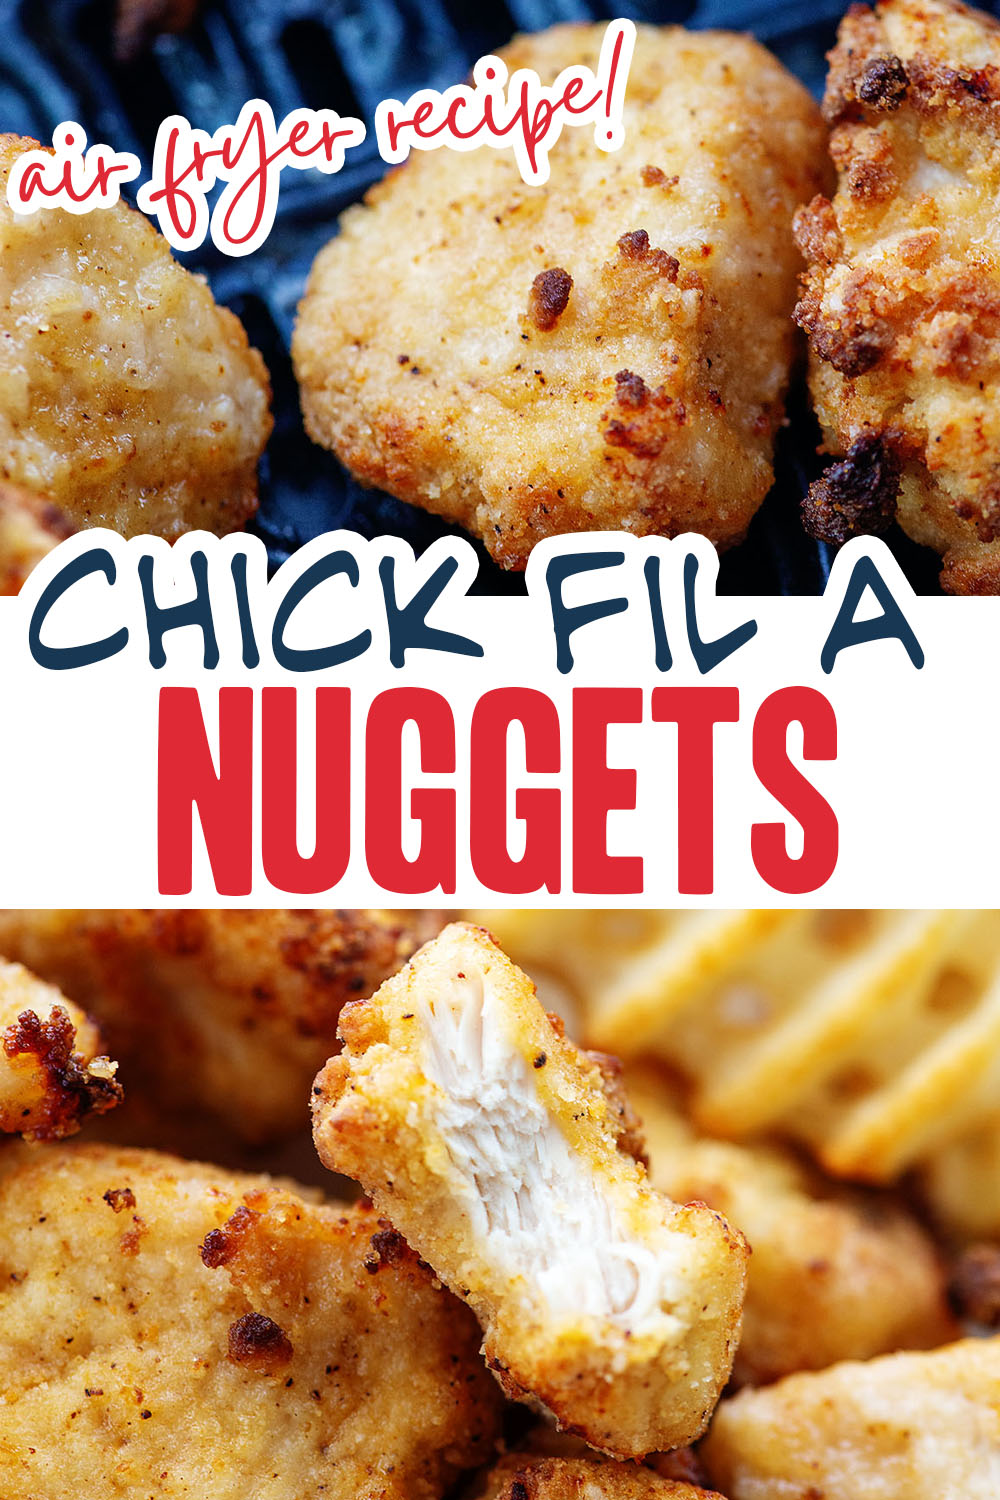 These air fryer nuggets turned out great with our copy cat chick fil a breading!